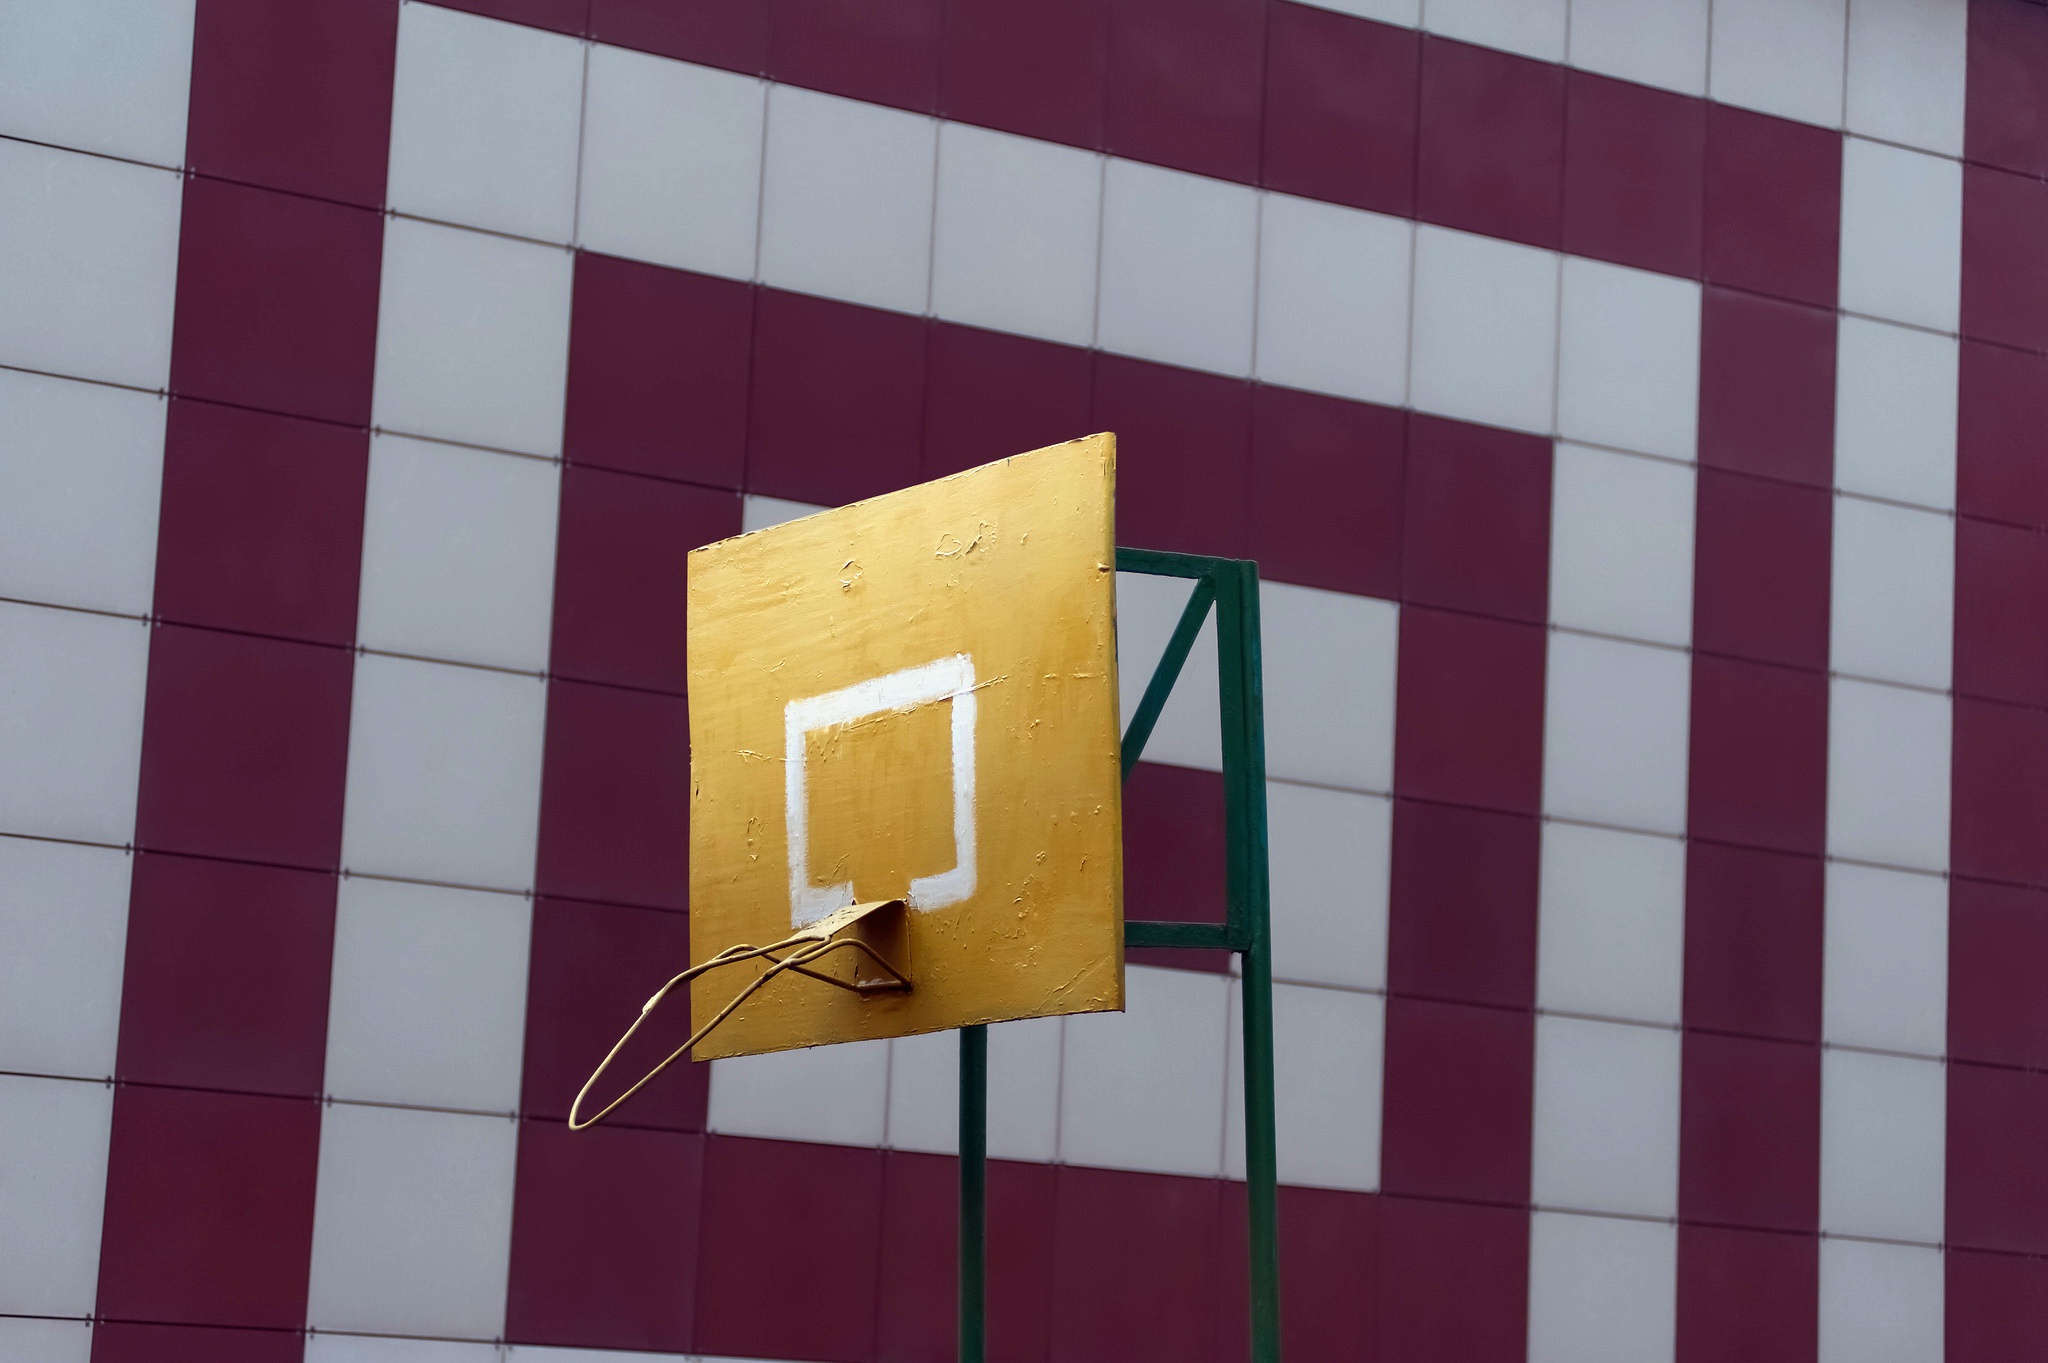 General 2048x1363 basketball sign hoop square yellow red gold artwork